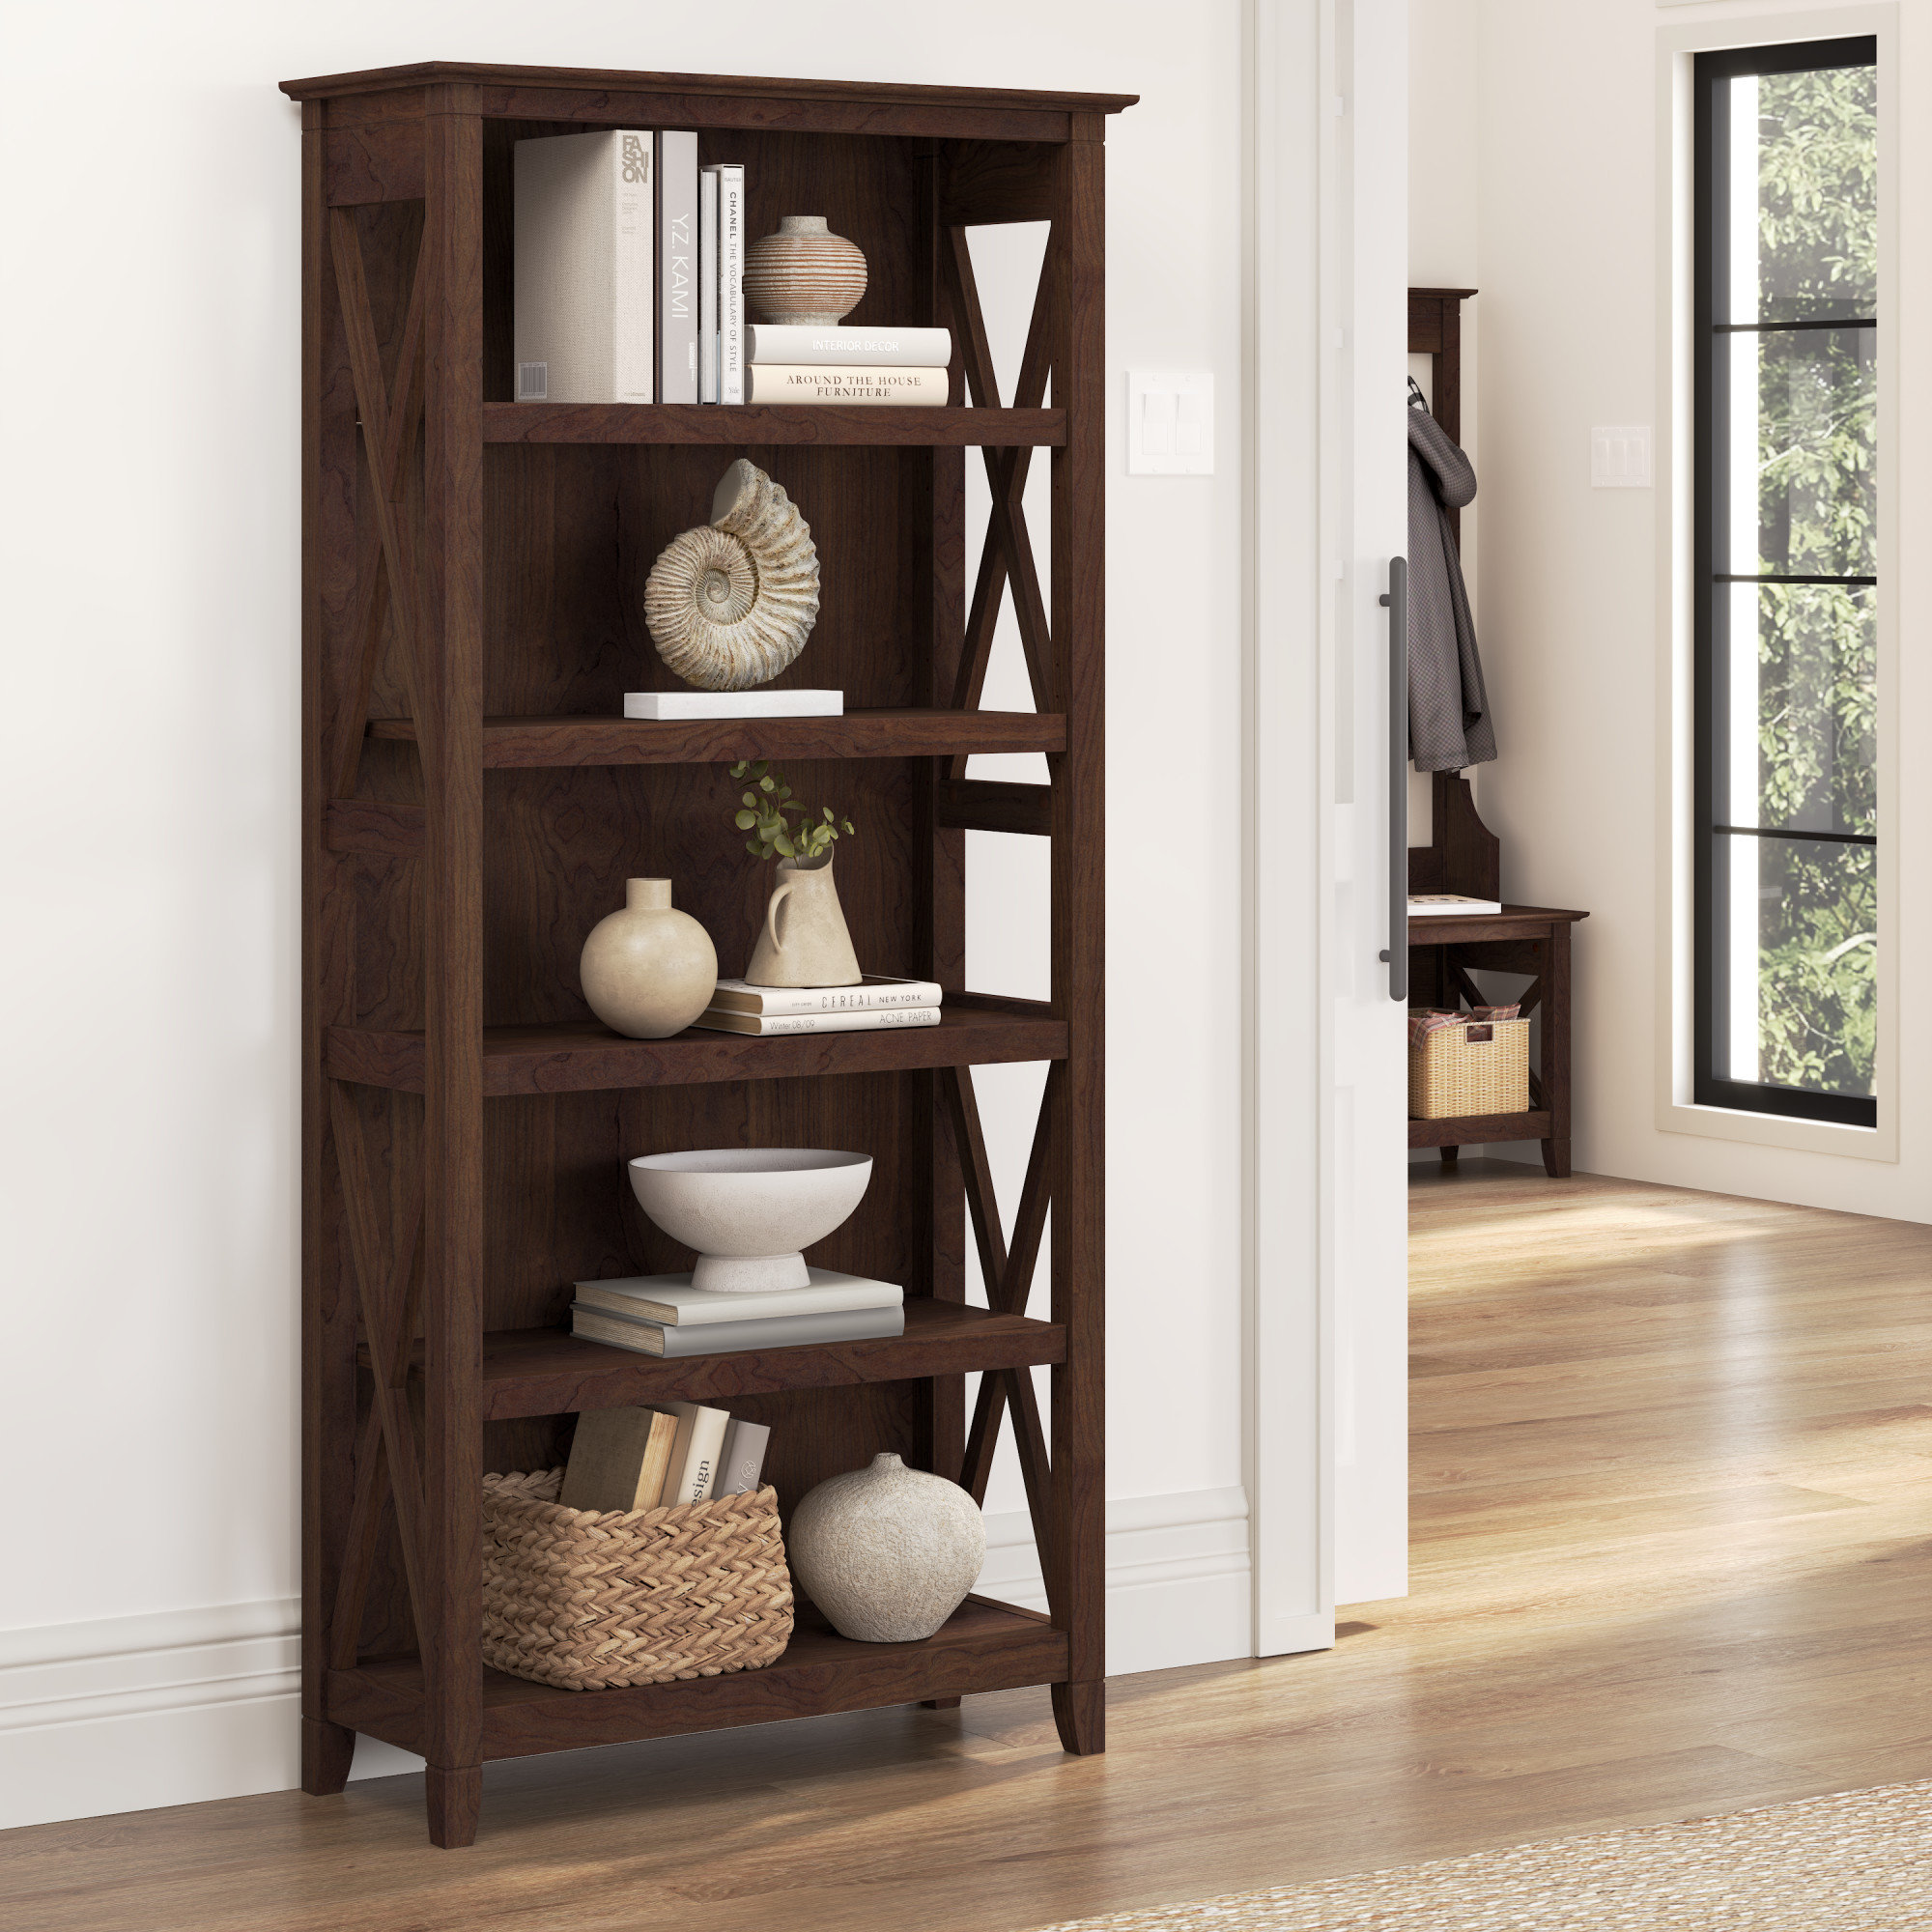 Small Bookcase Library Wooden Adjustable Shelves Storage Media Cabinet  Organizer